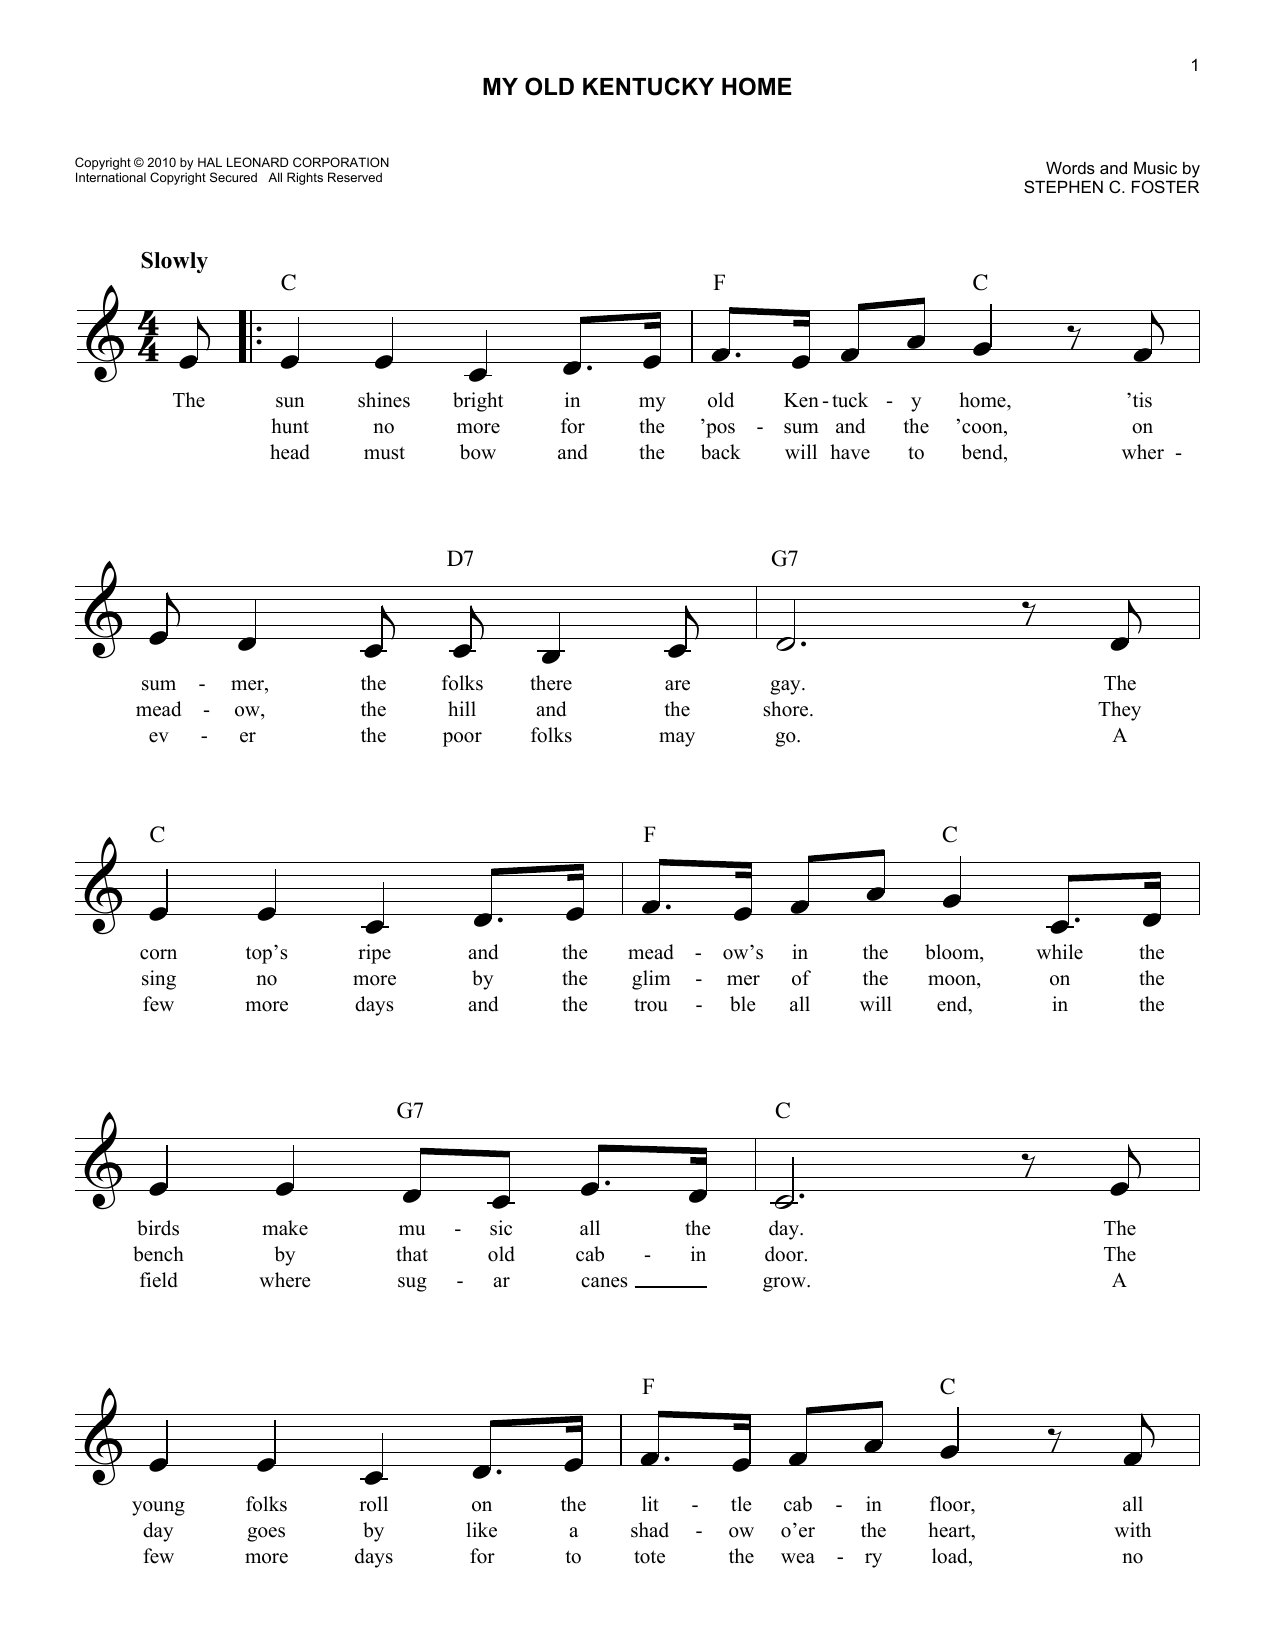 Download Stephen C. Foster My Old Kentucky Home Sheet Music